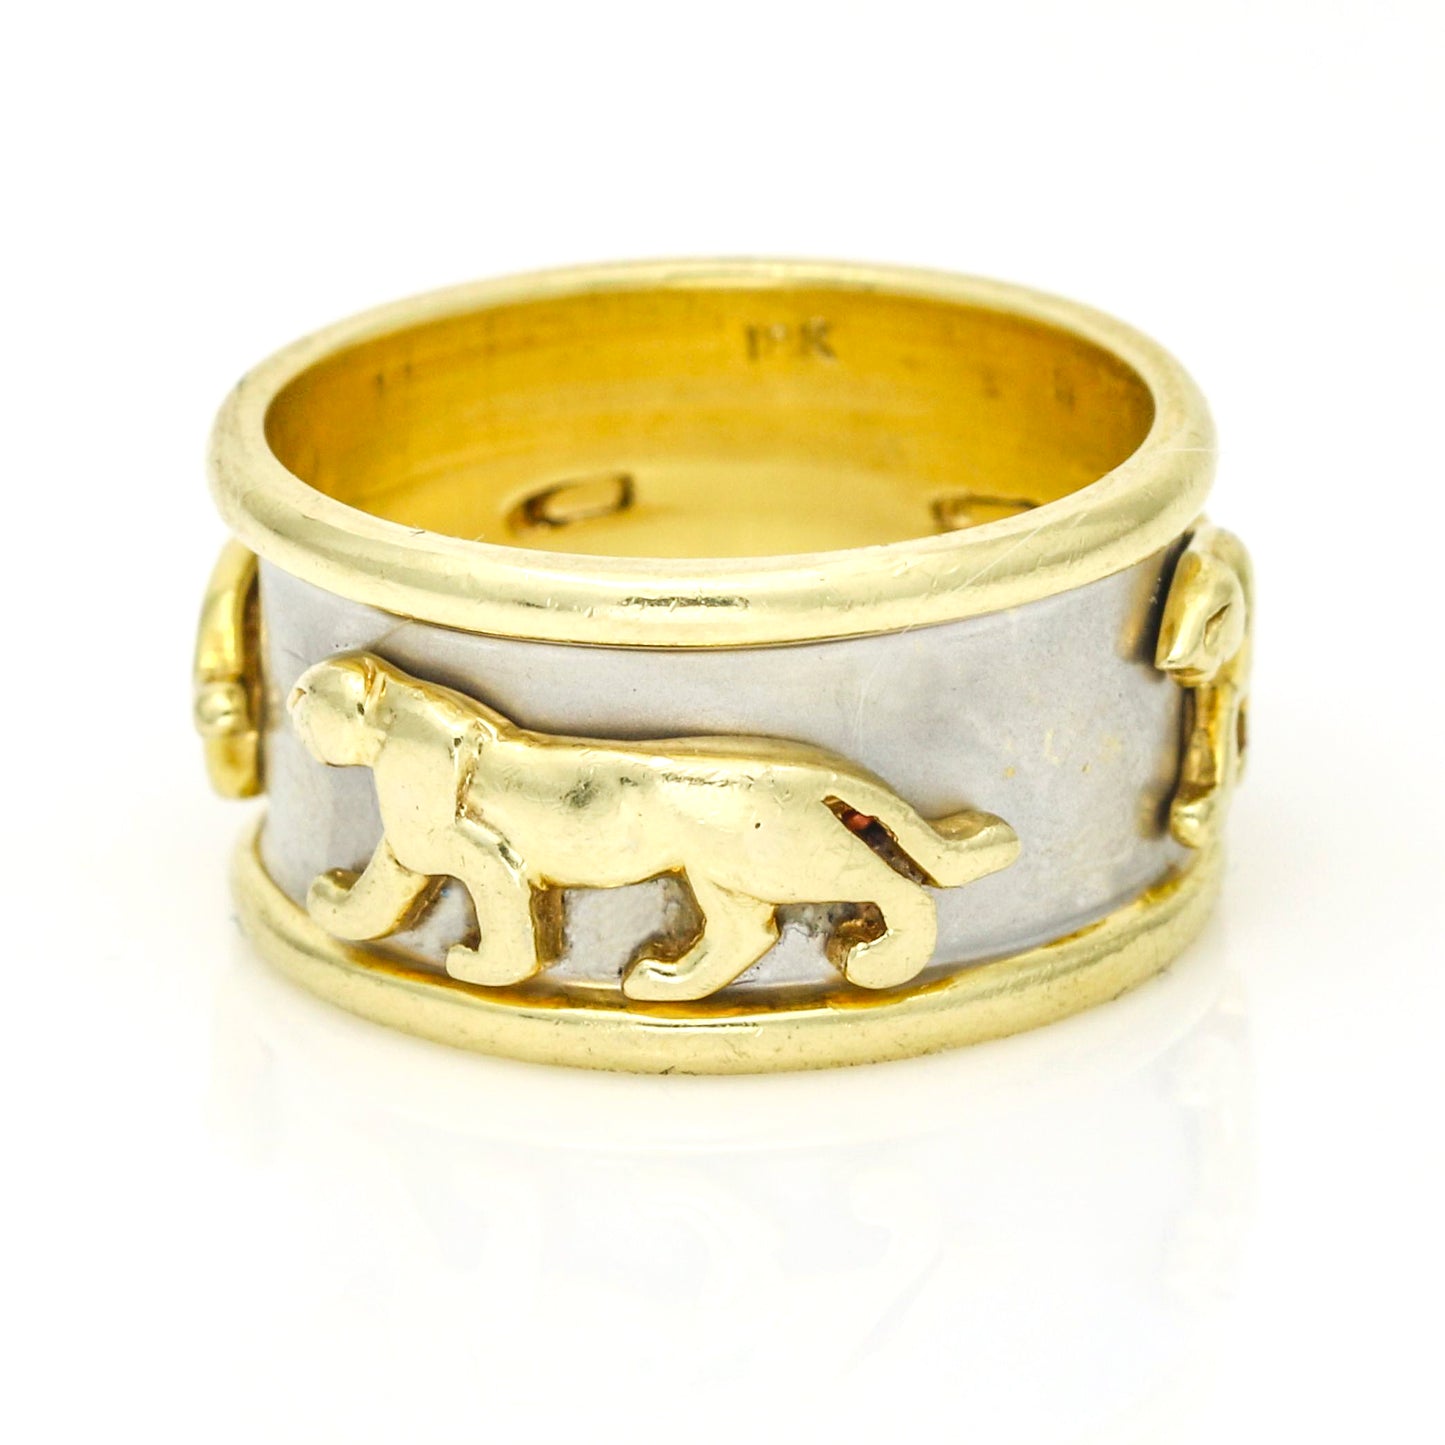 Panthers 18k Yellow and White Gold Wide Band Ring